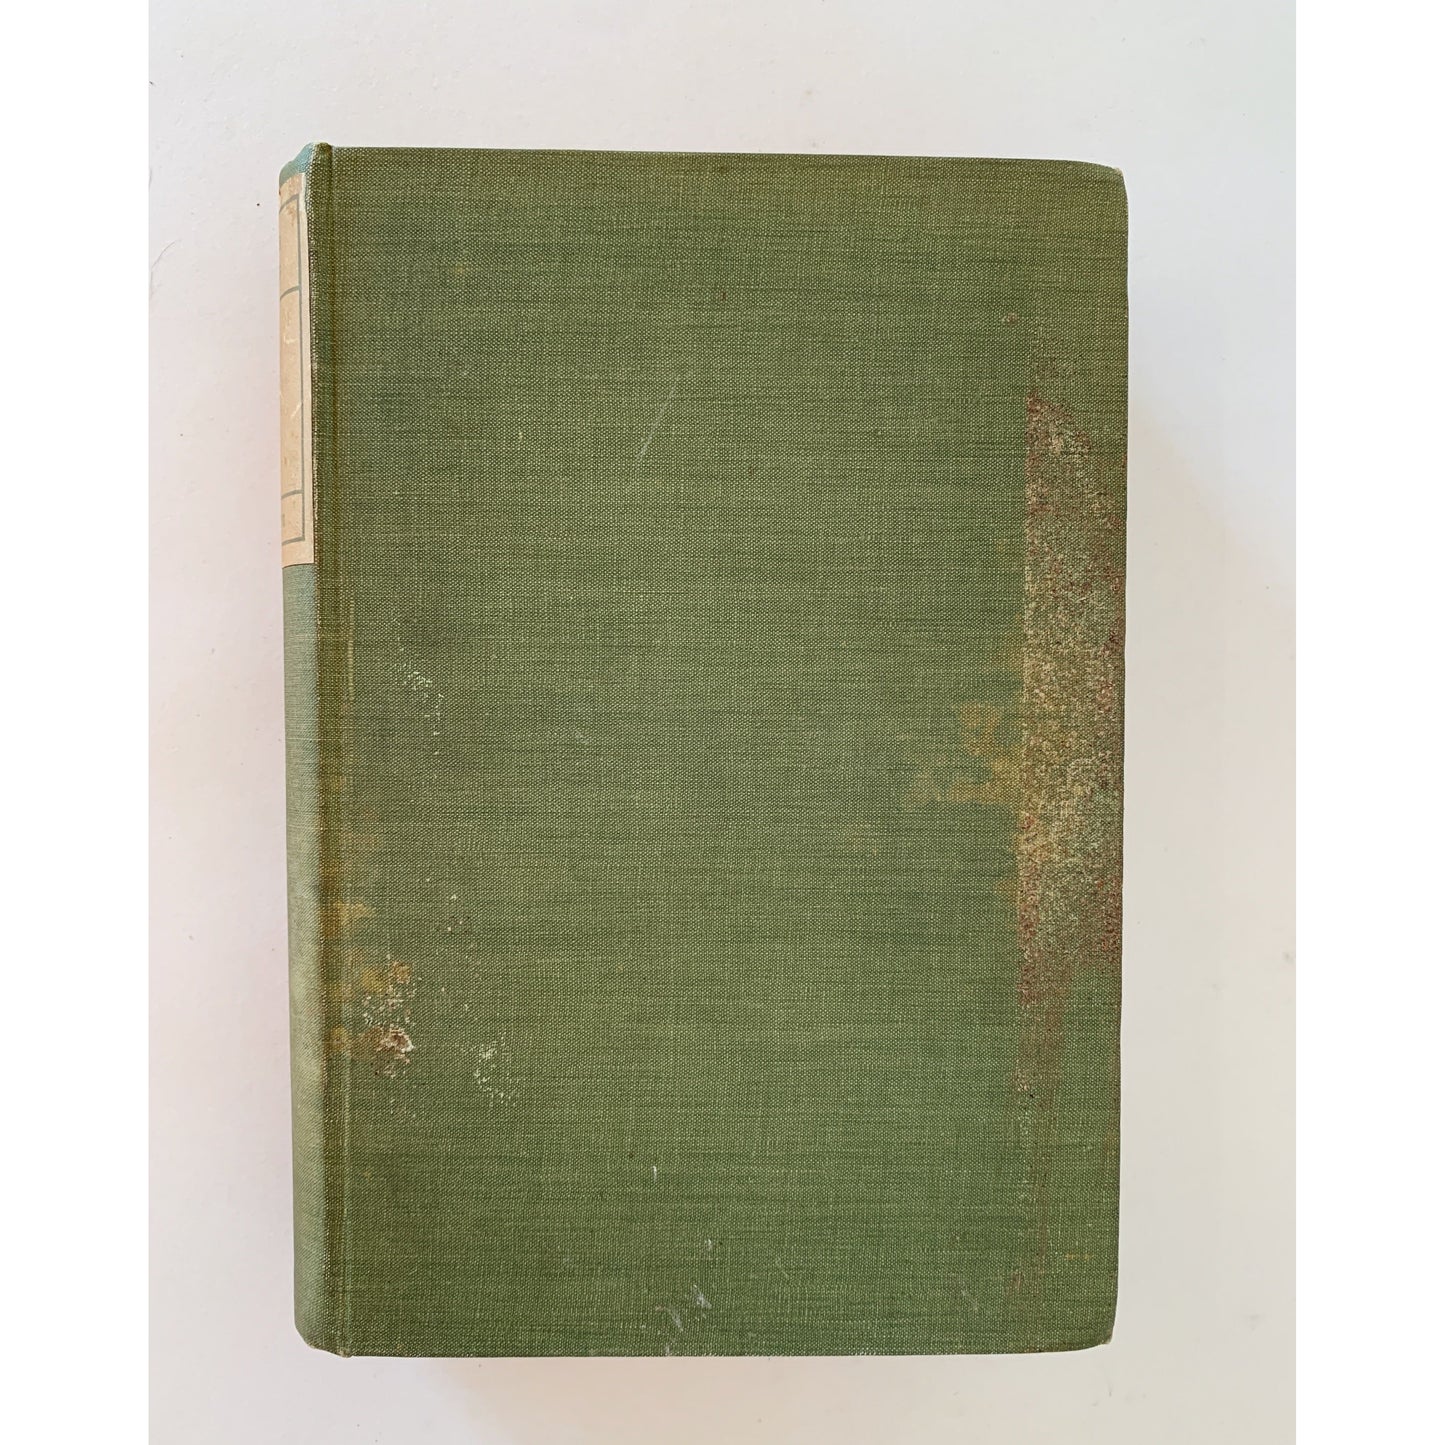 John Ruskin, Seven Lamps, Architecture and Painting, 1899, Aldine Edition, The World's Great Books